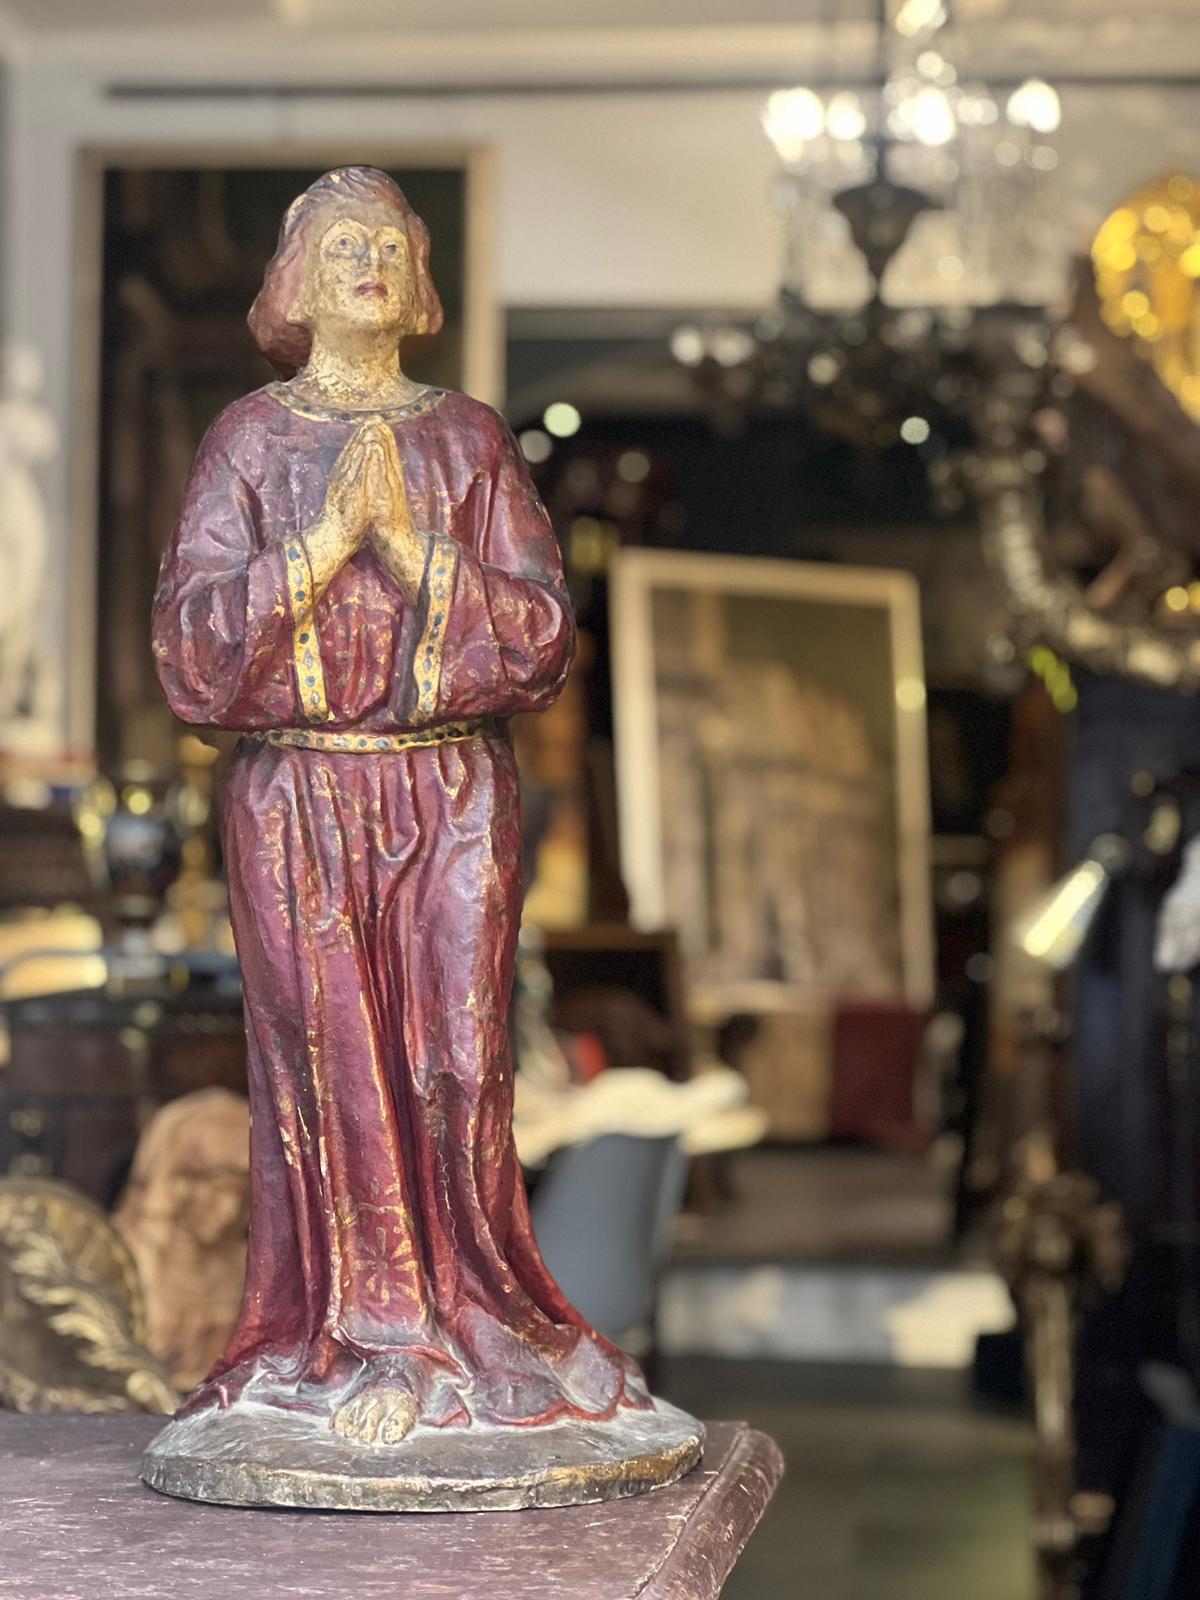 Rare paper mache statue depicting a praying figure, very detailed decorations on the dress. Italy, 18th century.

The sculpture would require a cleaning operation, we are willing to make a restoration estimate through our specialists.

Dimensions: